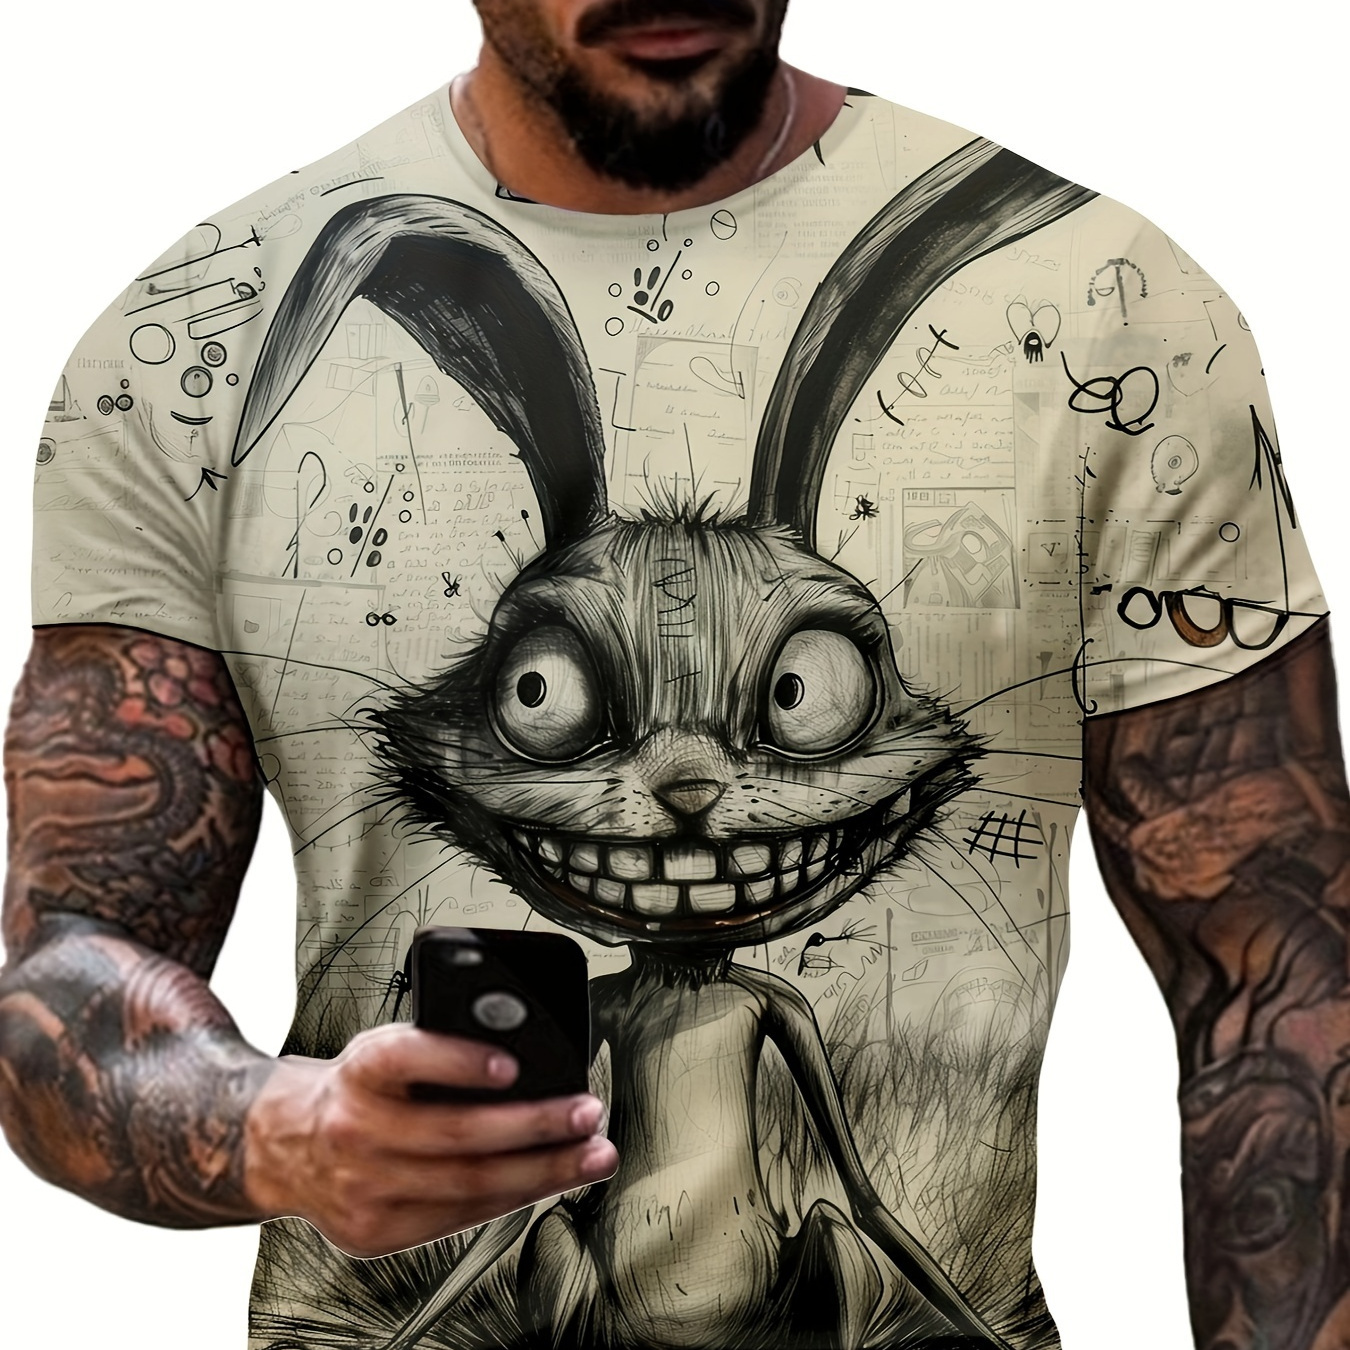 

Men's Cute Rabbit Graphic Print T-shirt, Casual Short Sleeve Crew Neck Tee, Men's Clothing For Summer Outdoor